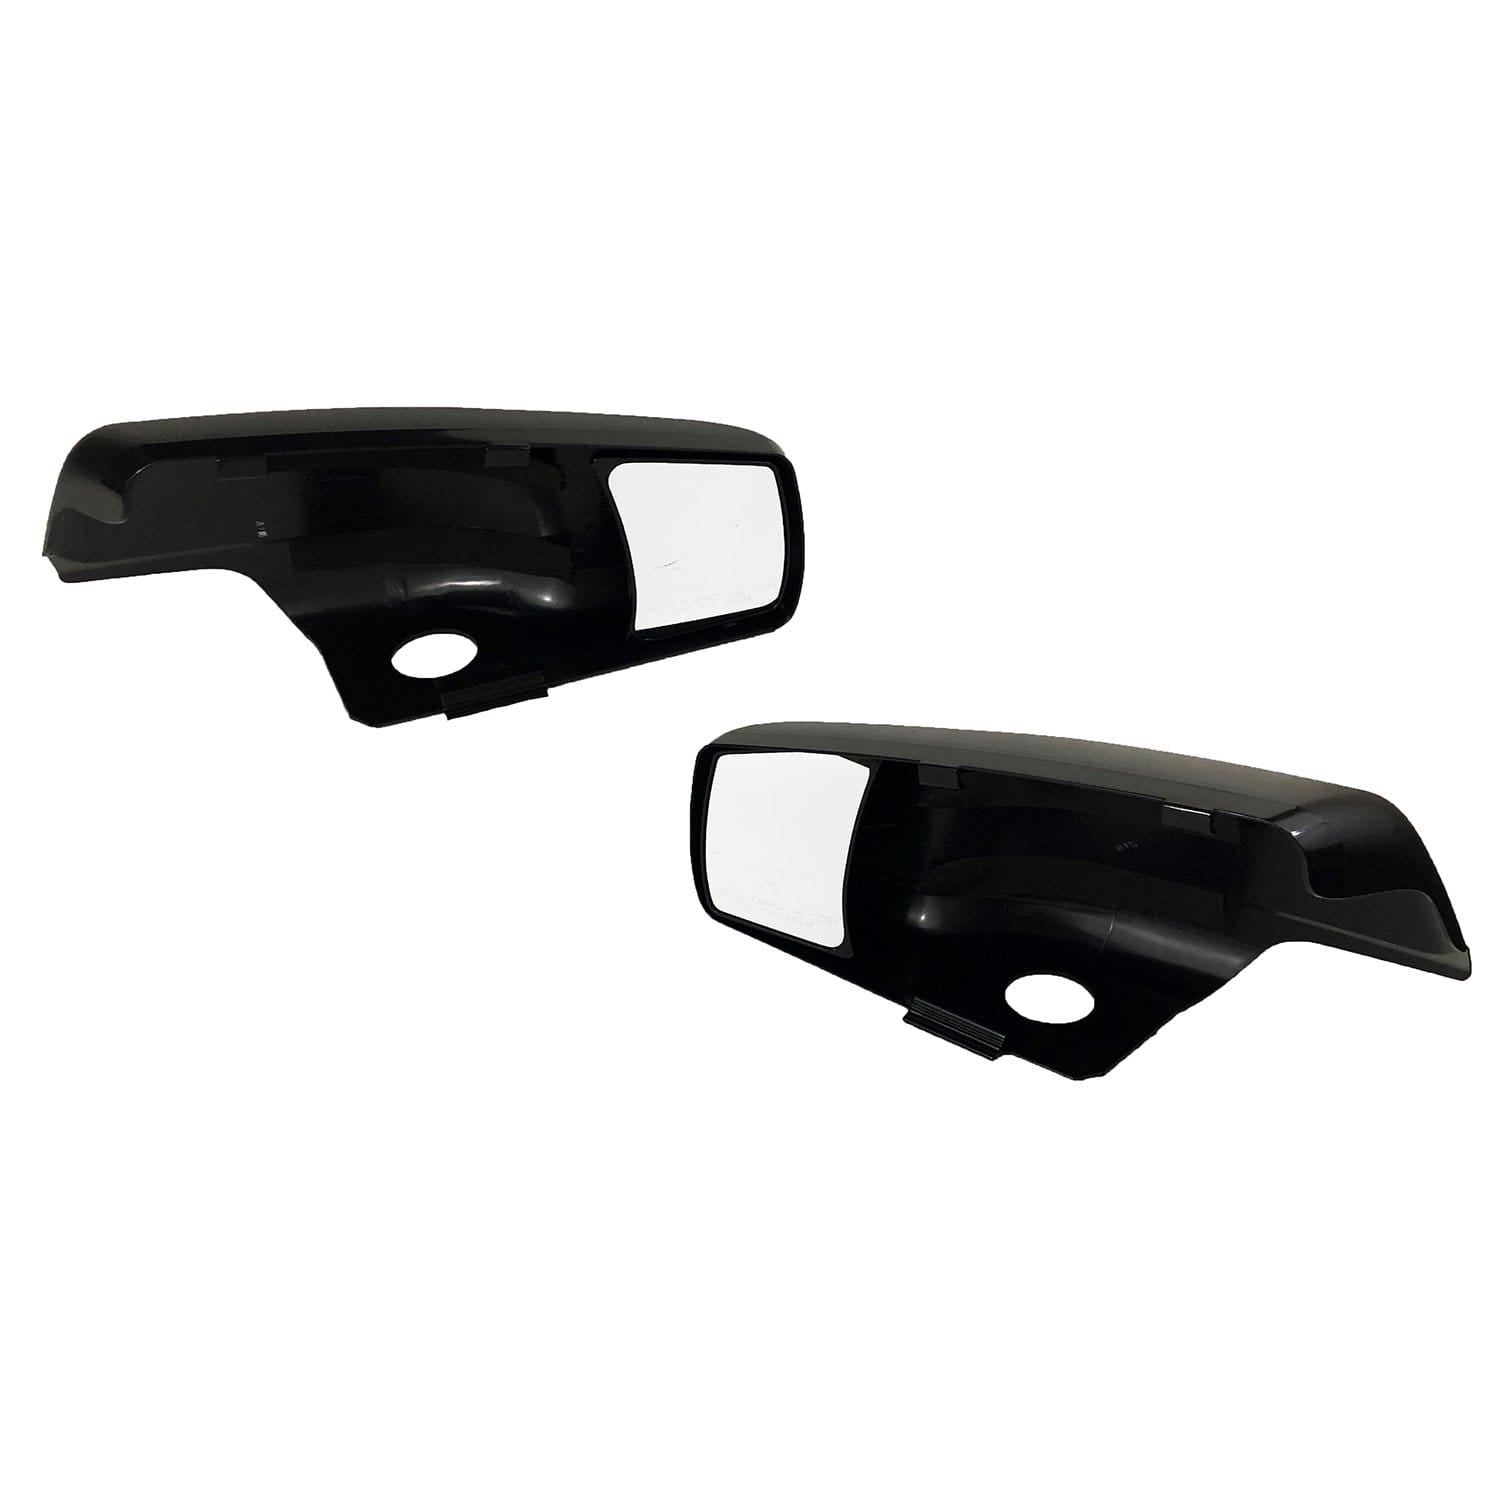 K Source 80920 Snap-On Towing Mirrors for Select Chevy/GMC Models (2015+)